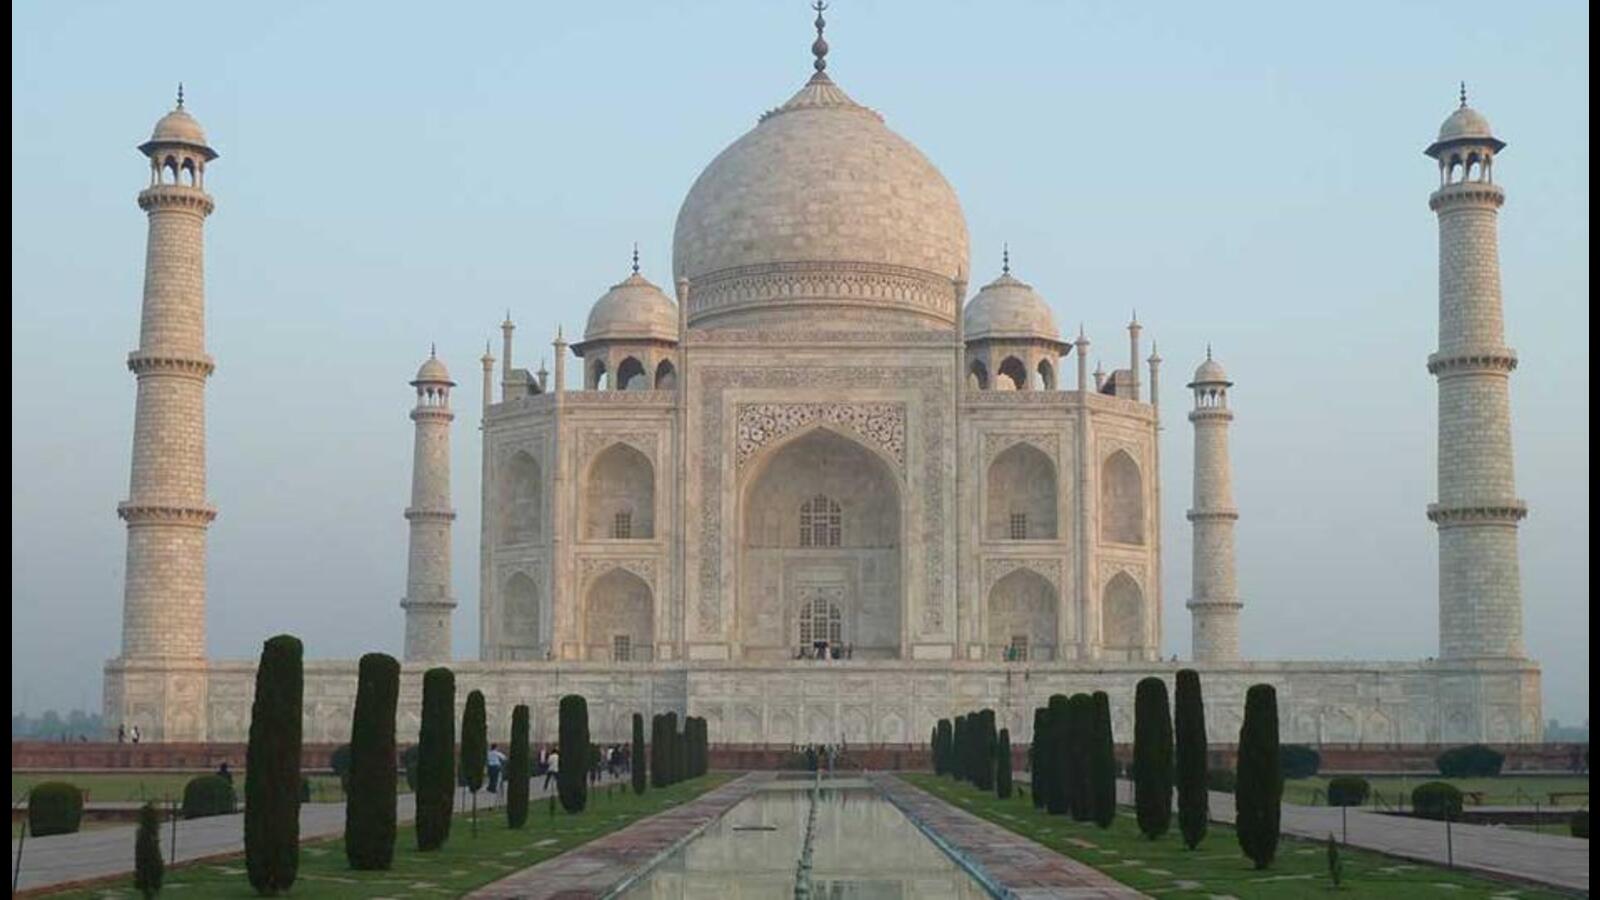 No commercial activities within 500mts of Taj Mahal, says SC ...